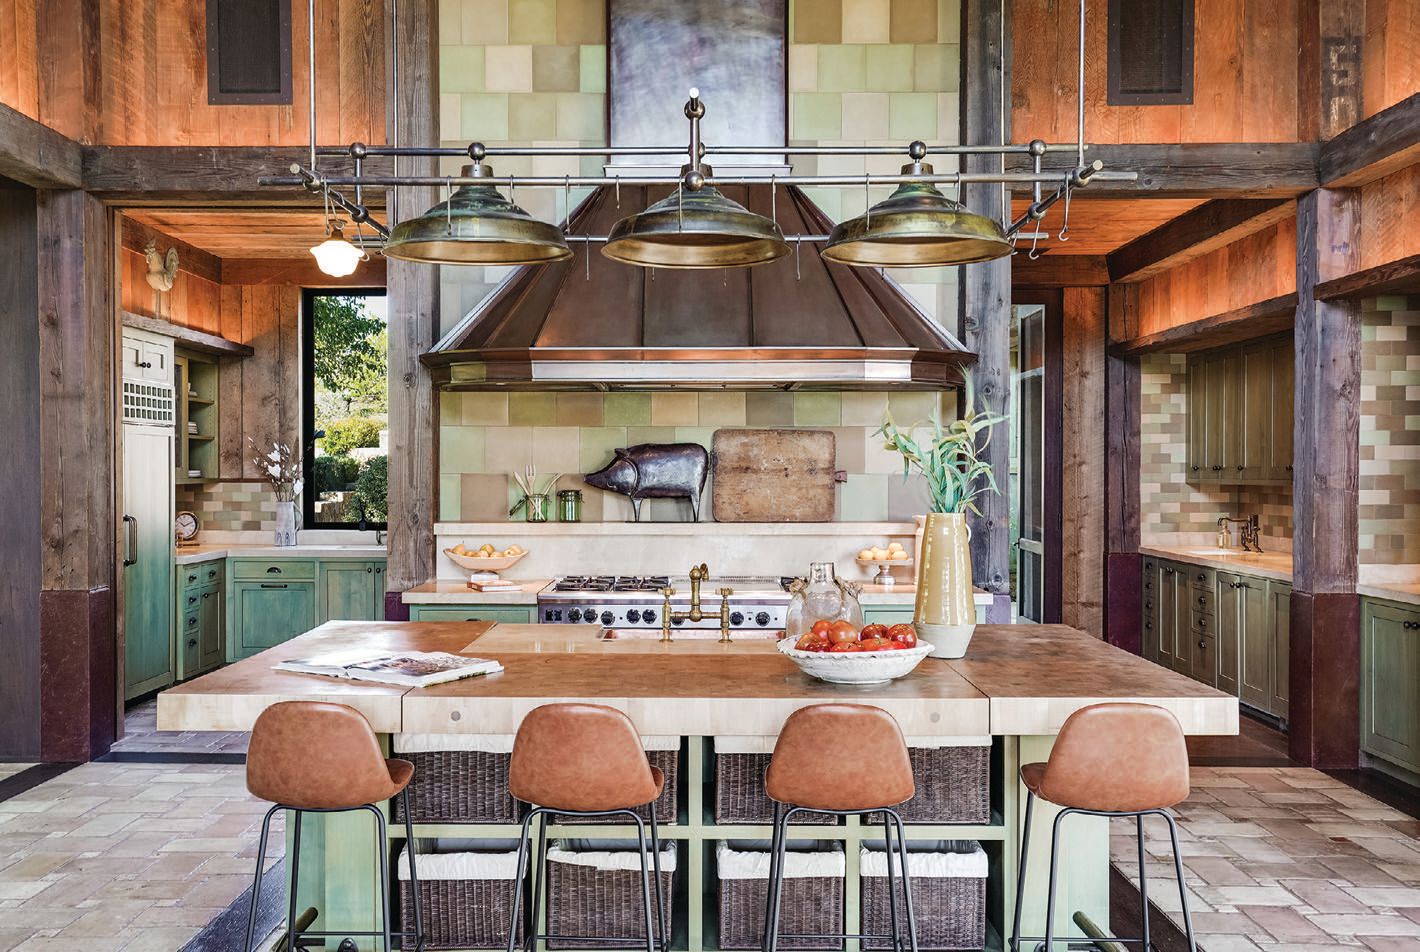 The idyllic kitchen introduces contrasting colors and farmhouse-inspired decor. PHOTO BY CAROLINE PEEL AND AERIAL CANVAS